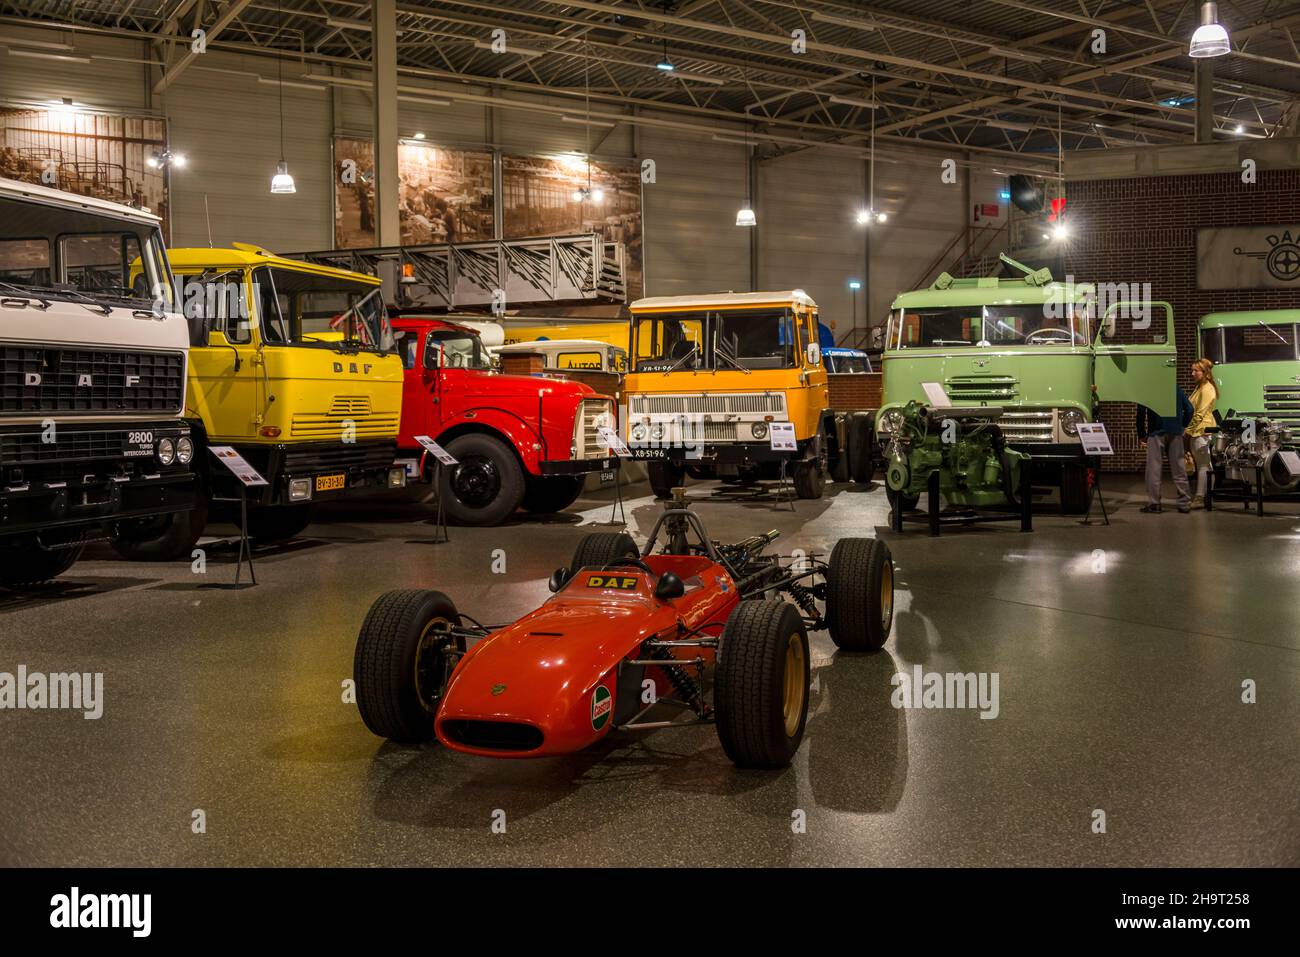 Eindhoven, DAF Museum Stock Photo